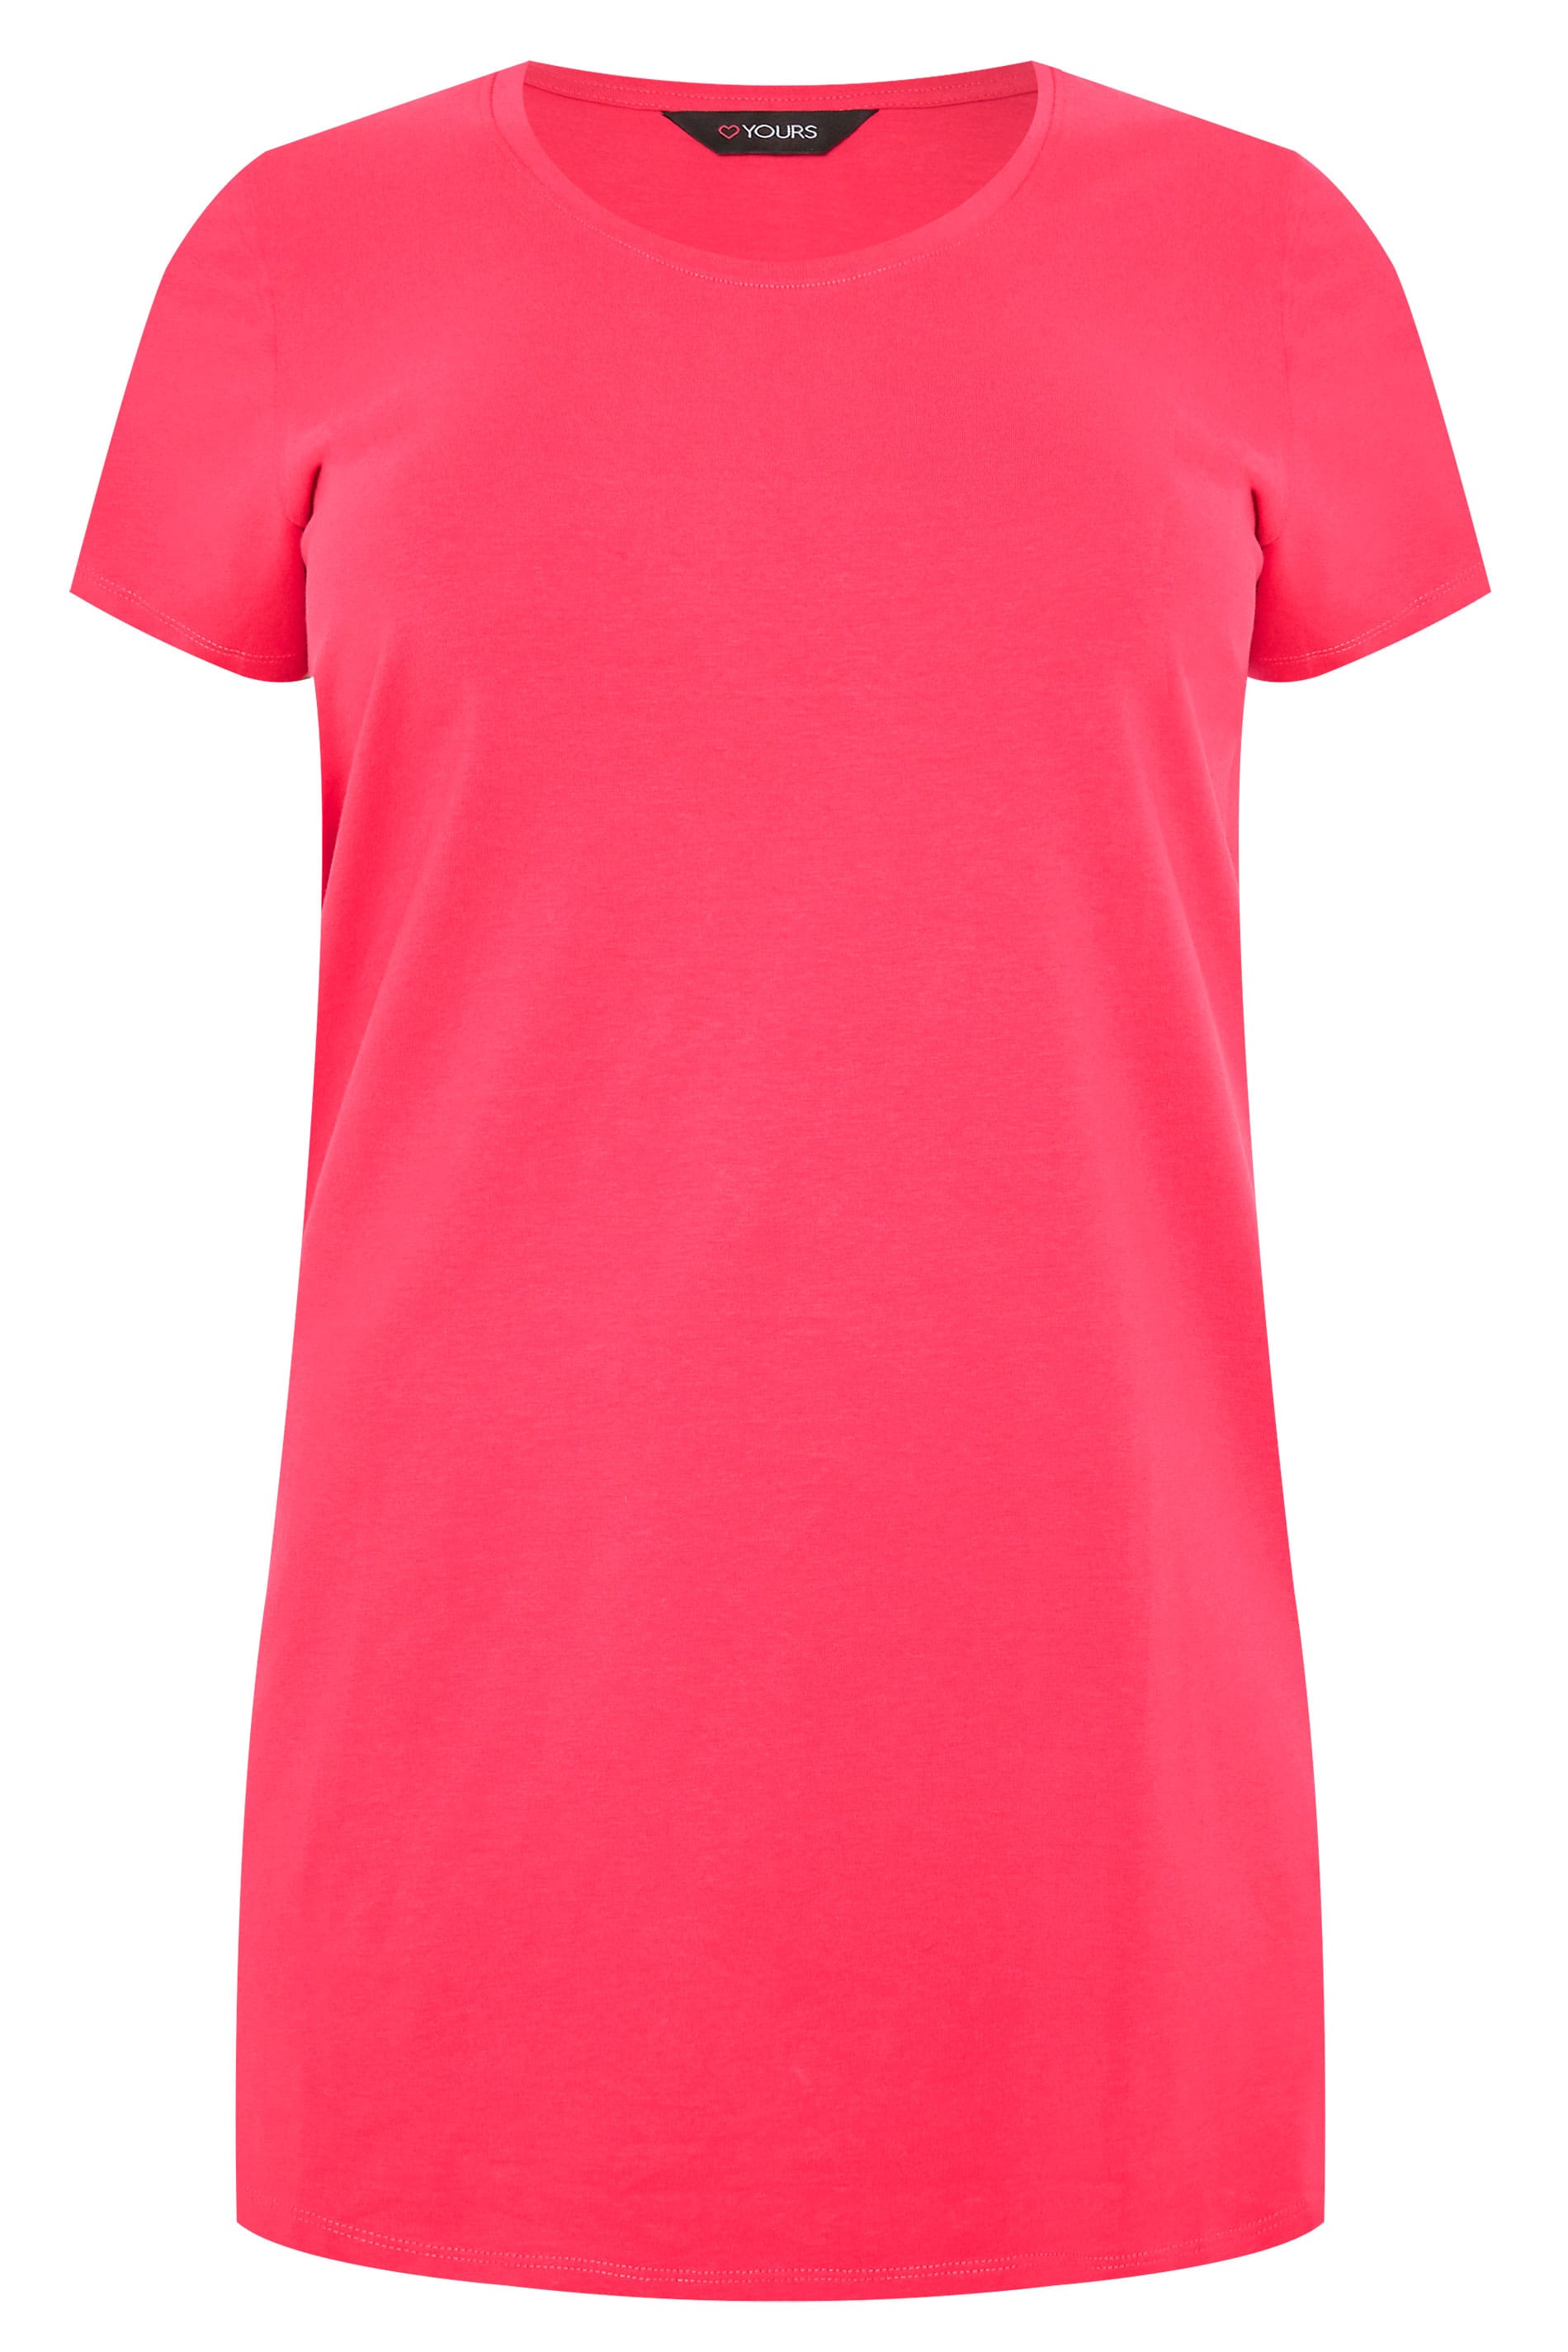 Plus Size Pink Longline T-Shirt | Sizes 16 to 36 | Yours Clothing